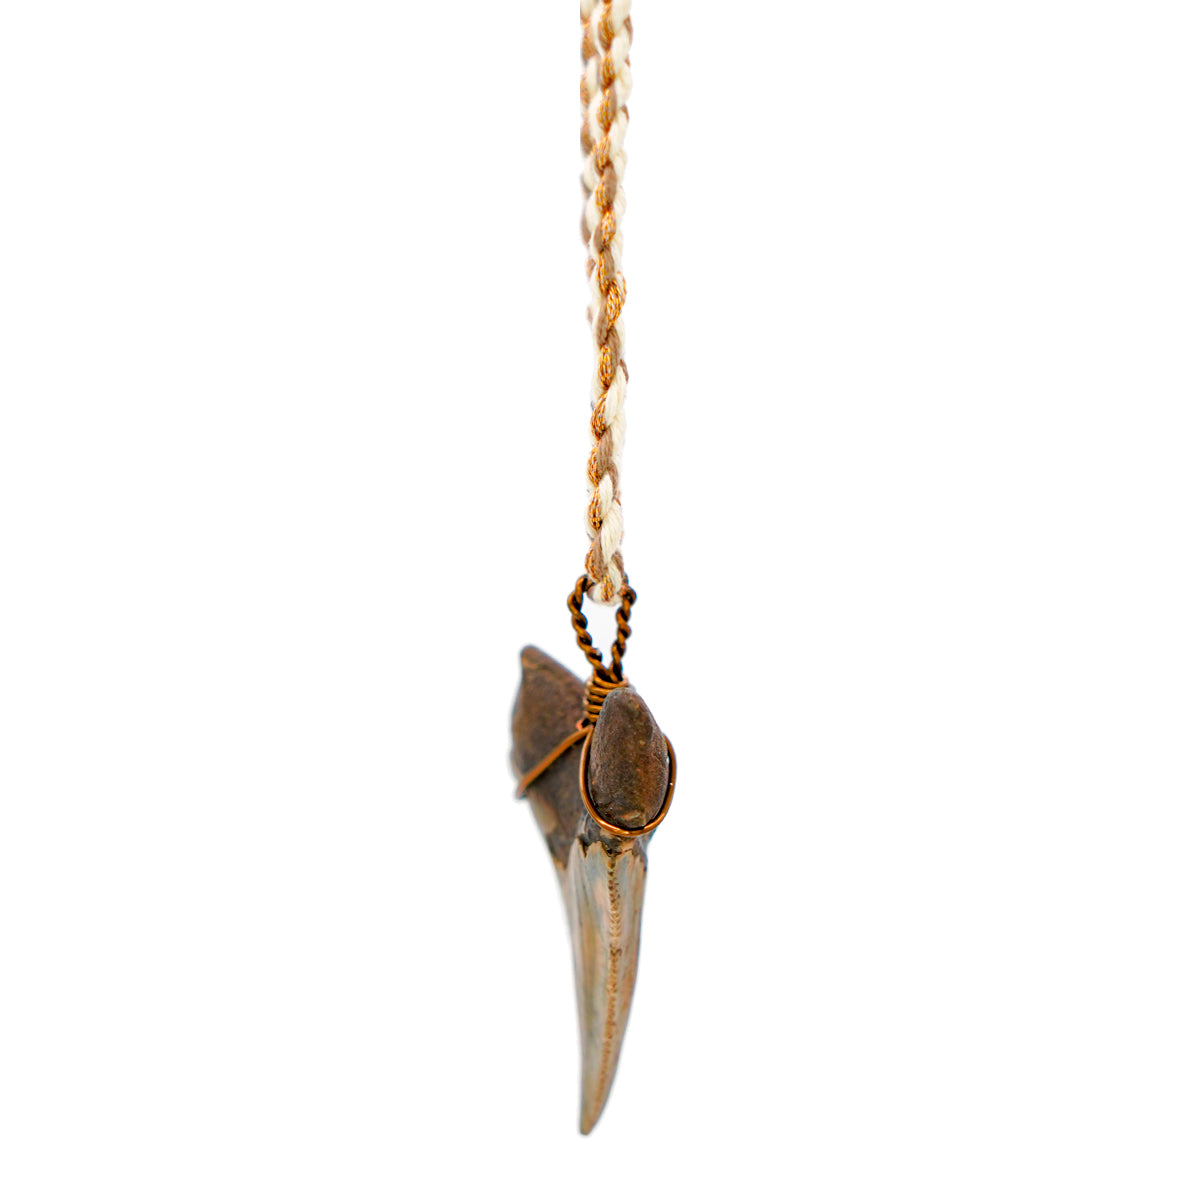 Fossilized Megalodon Shark Tooth on Hand Twisted Hemp & Cotton Cord